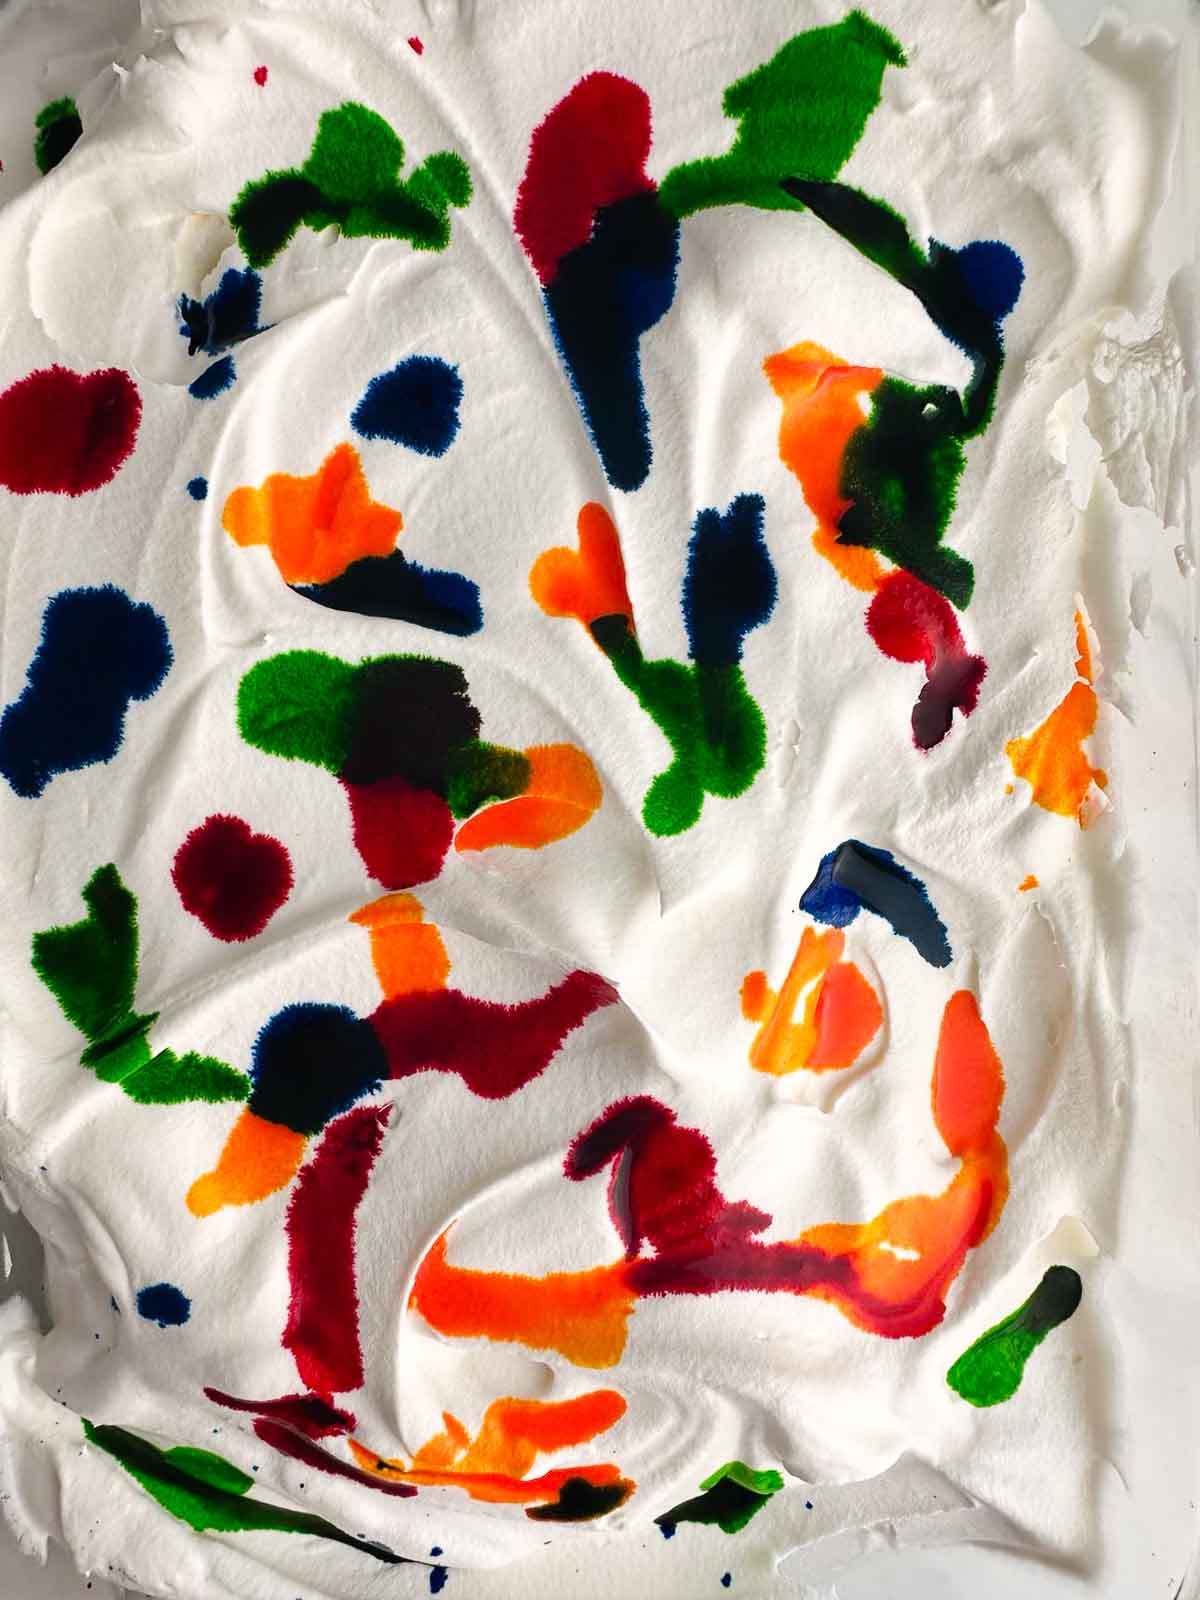 Dot the Cool Whip with food coloring.